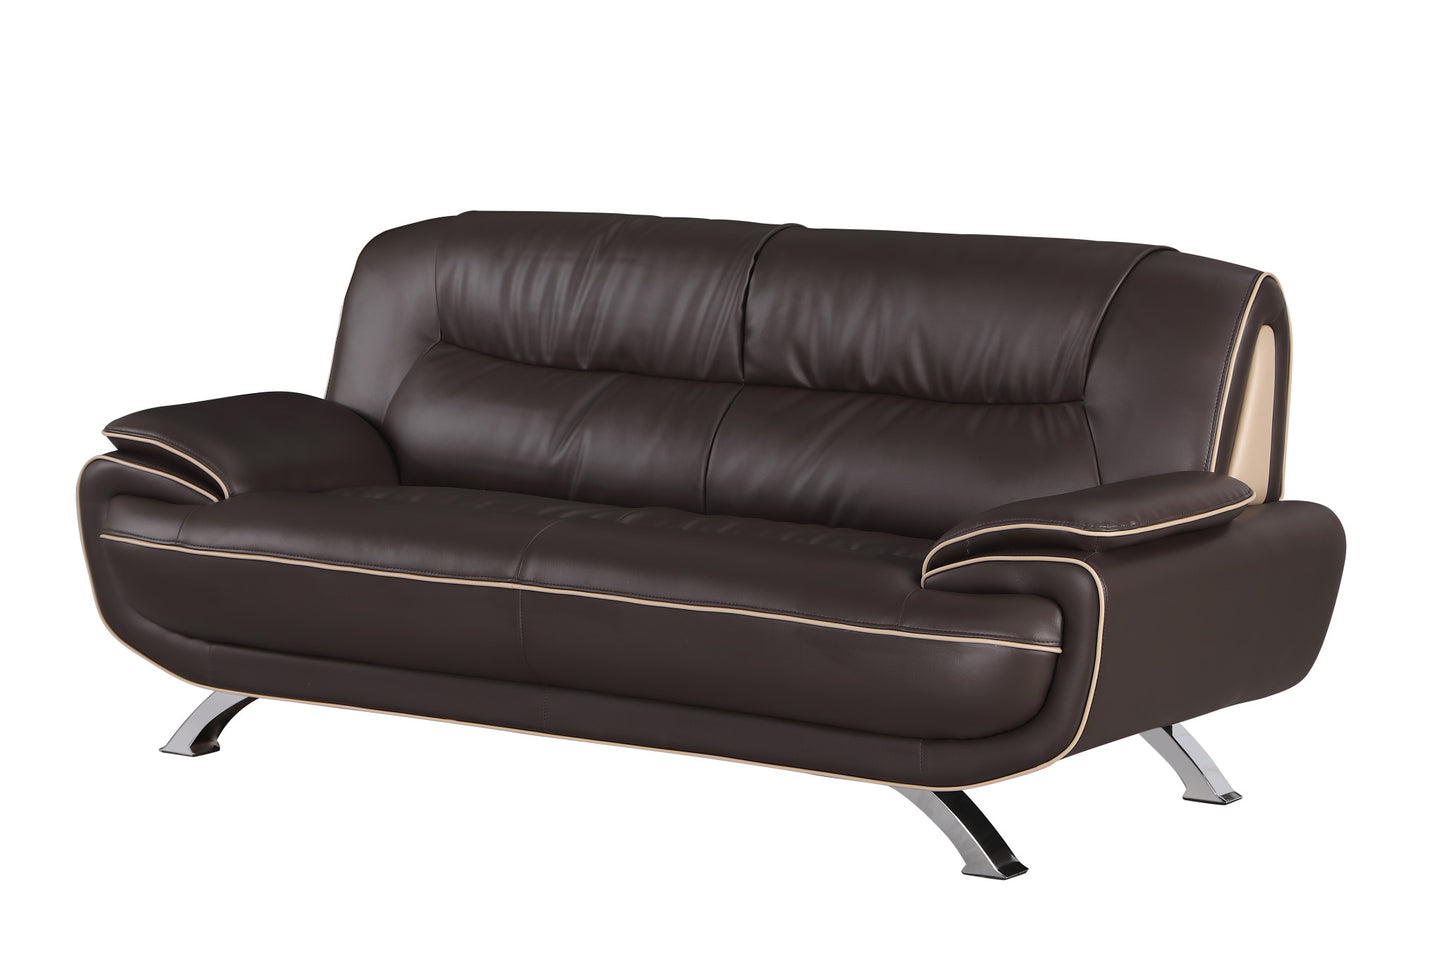 80" Brown Leather Sofa With Silver Legs